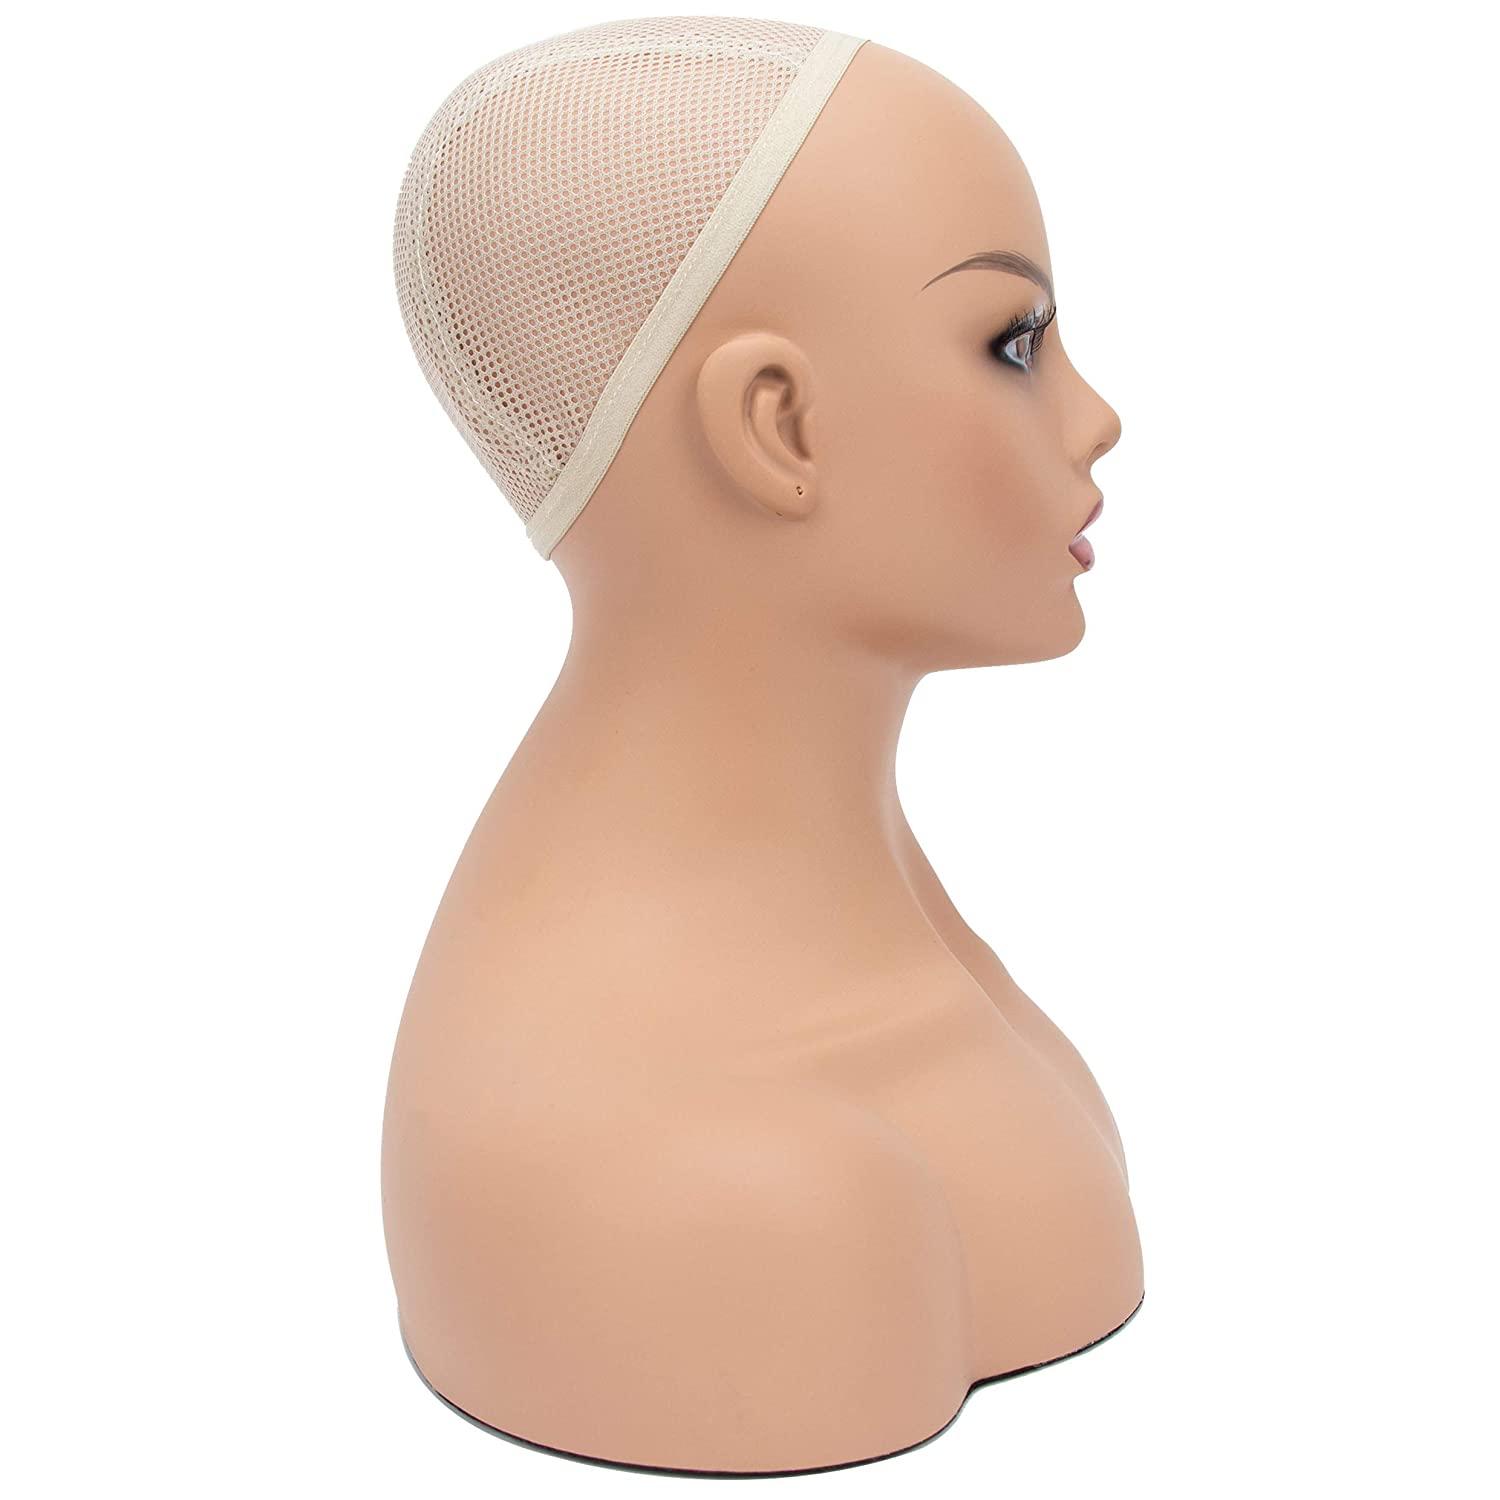 Realistic Mannequin Wig Head PVC Manikin Bust Stand for Display